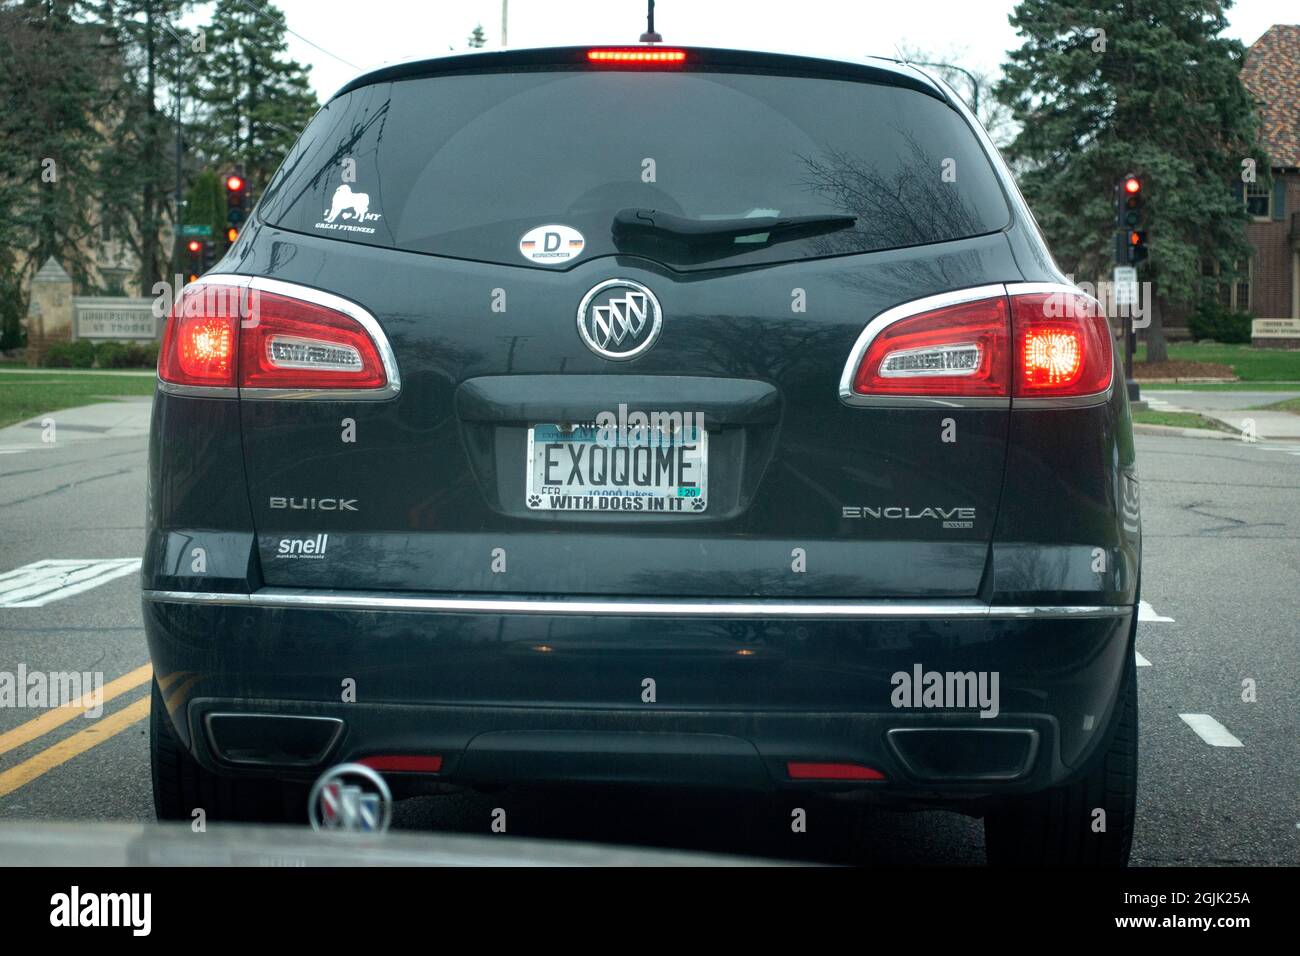 Buick SUV with a license plate that says 'EXQQQME'  which may be interpreted as 'excuse me'. St Paul Minnesota MN USA Stock Photo